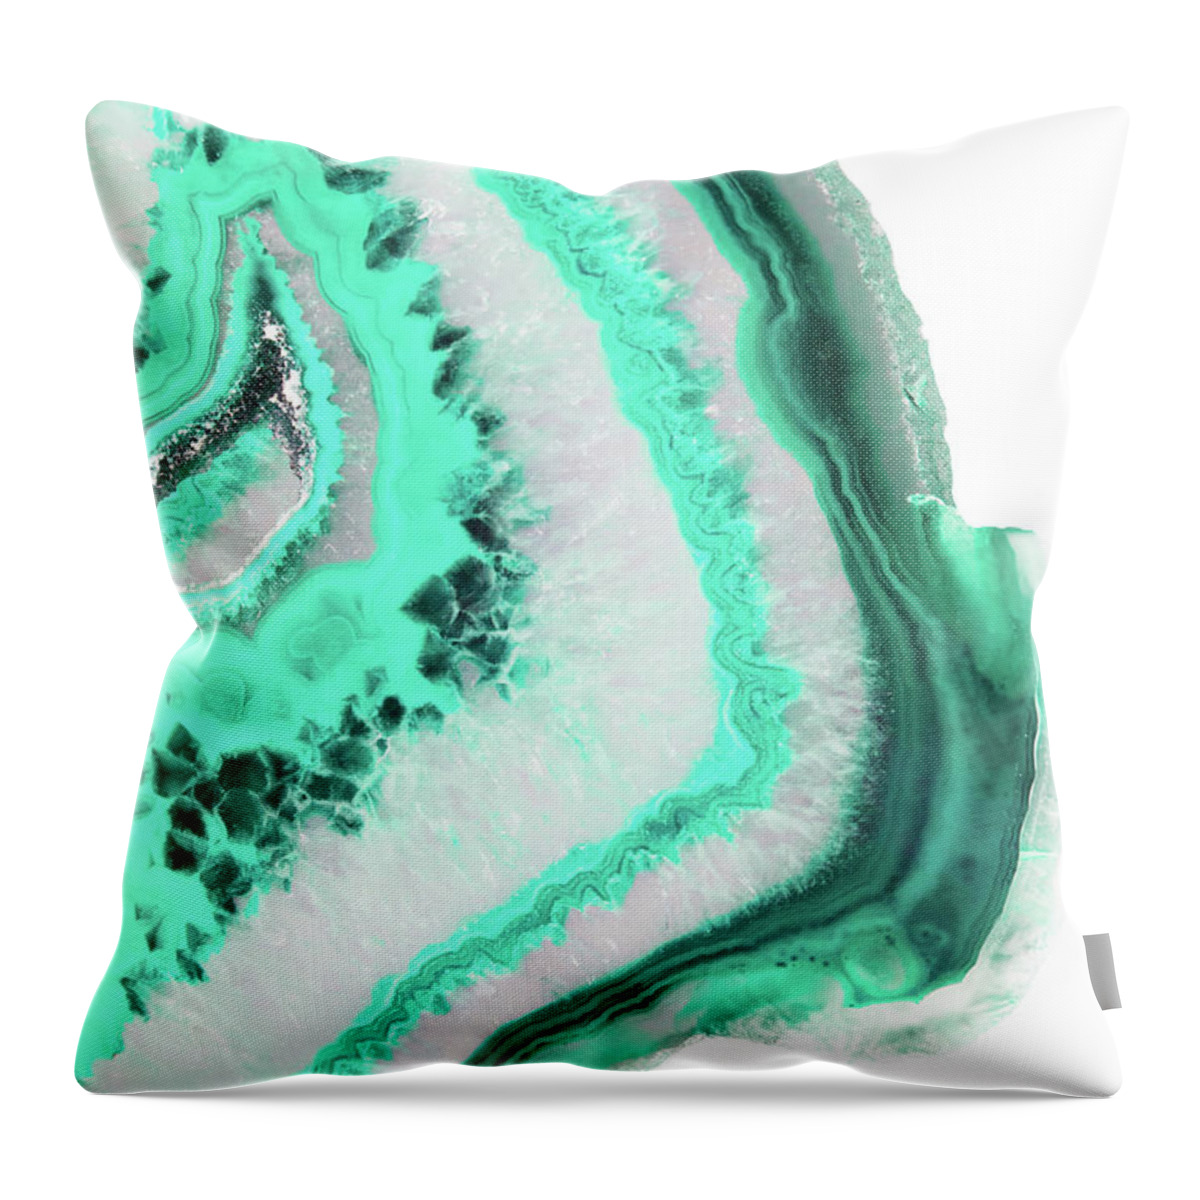 Mint Throw Pillow featuring the photograph Mint Agate by Emanuela Carratoni